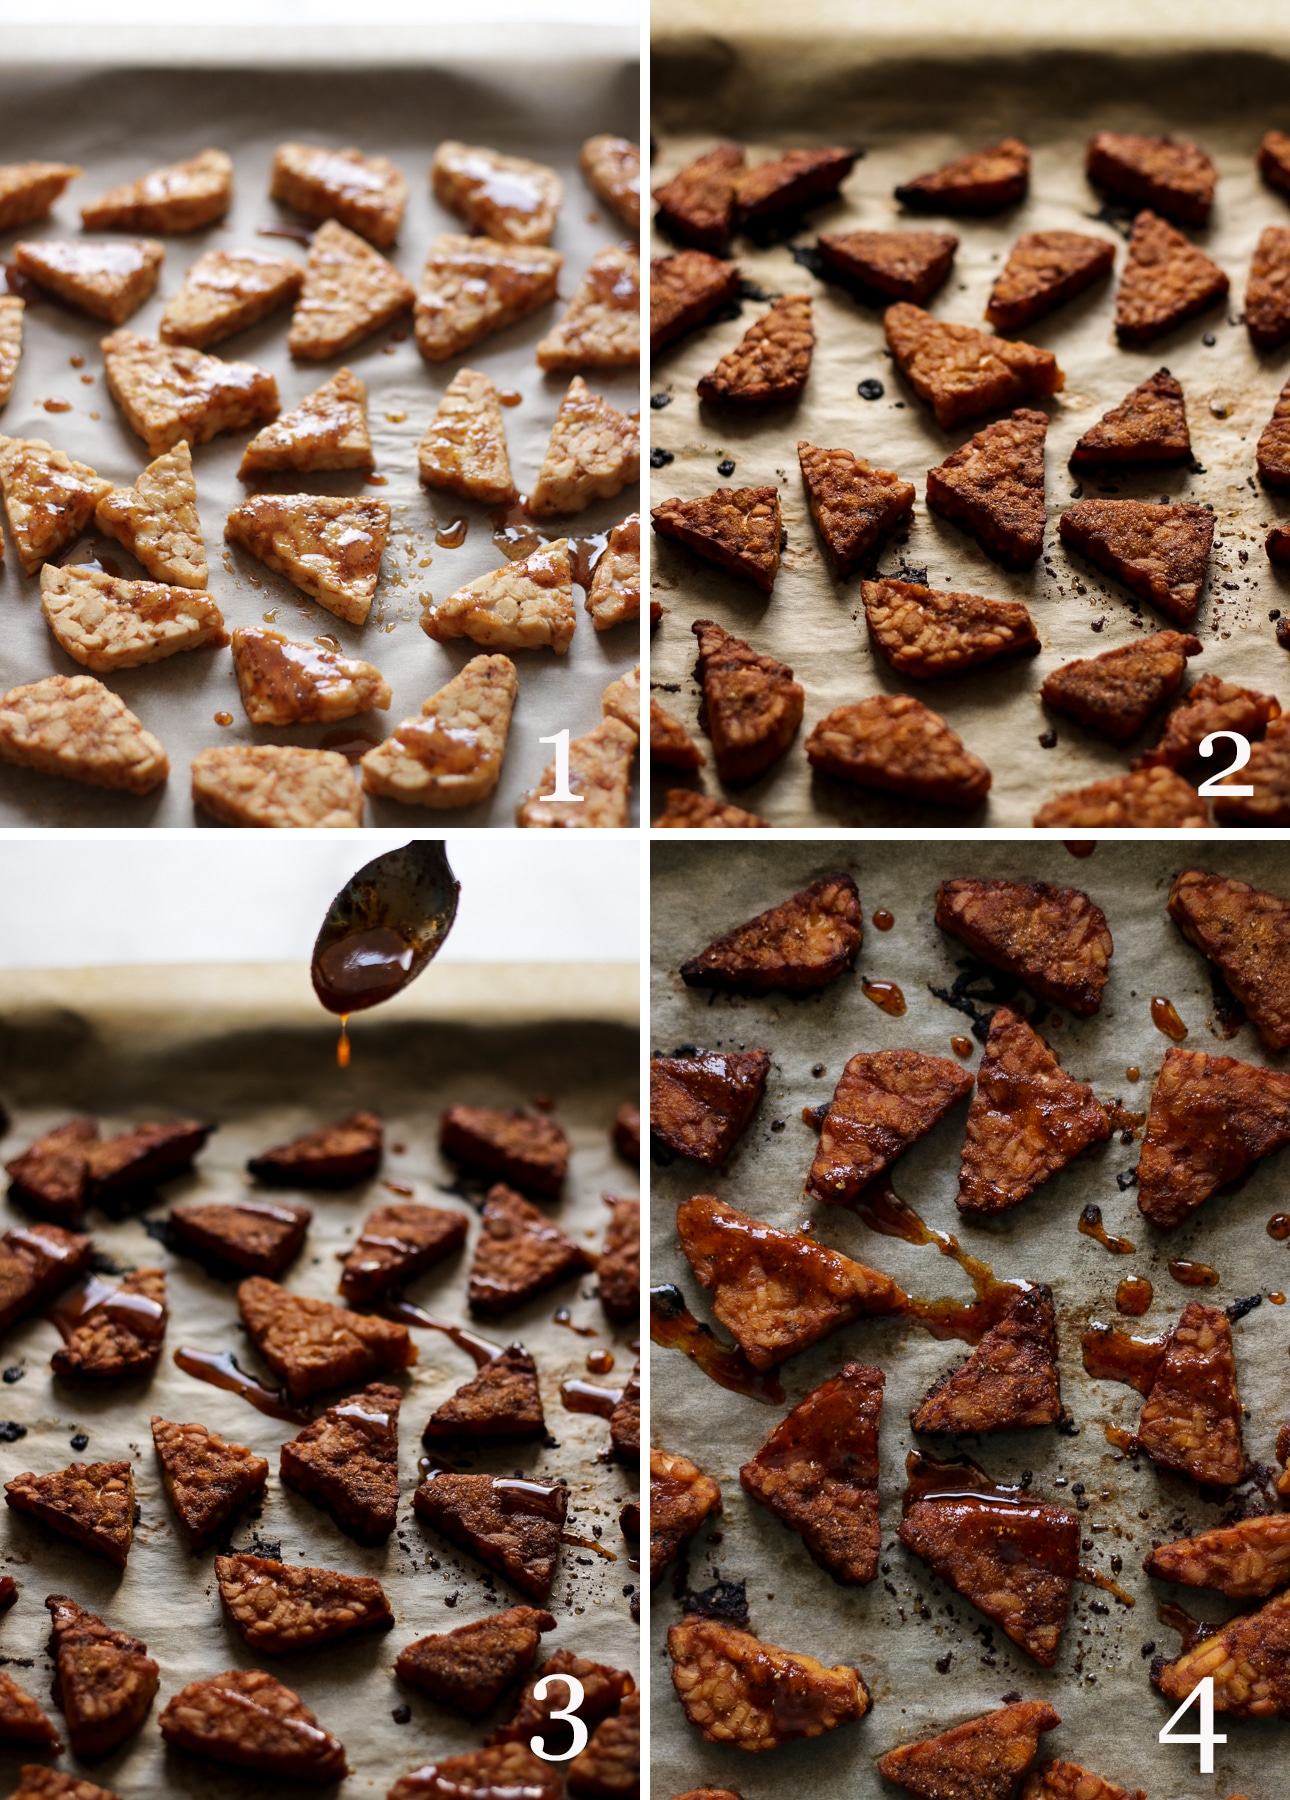 Marinated Tempeh on a Baking Sheet Collage of Four Images